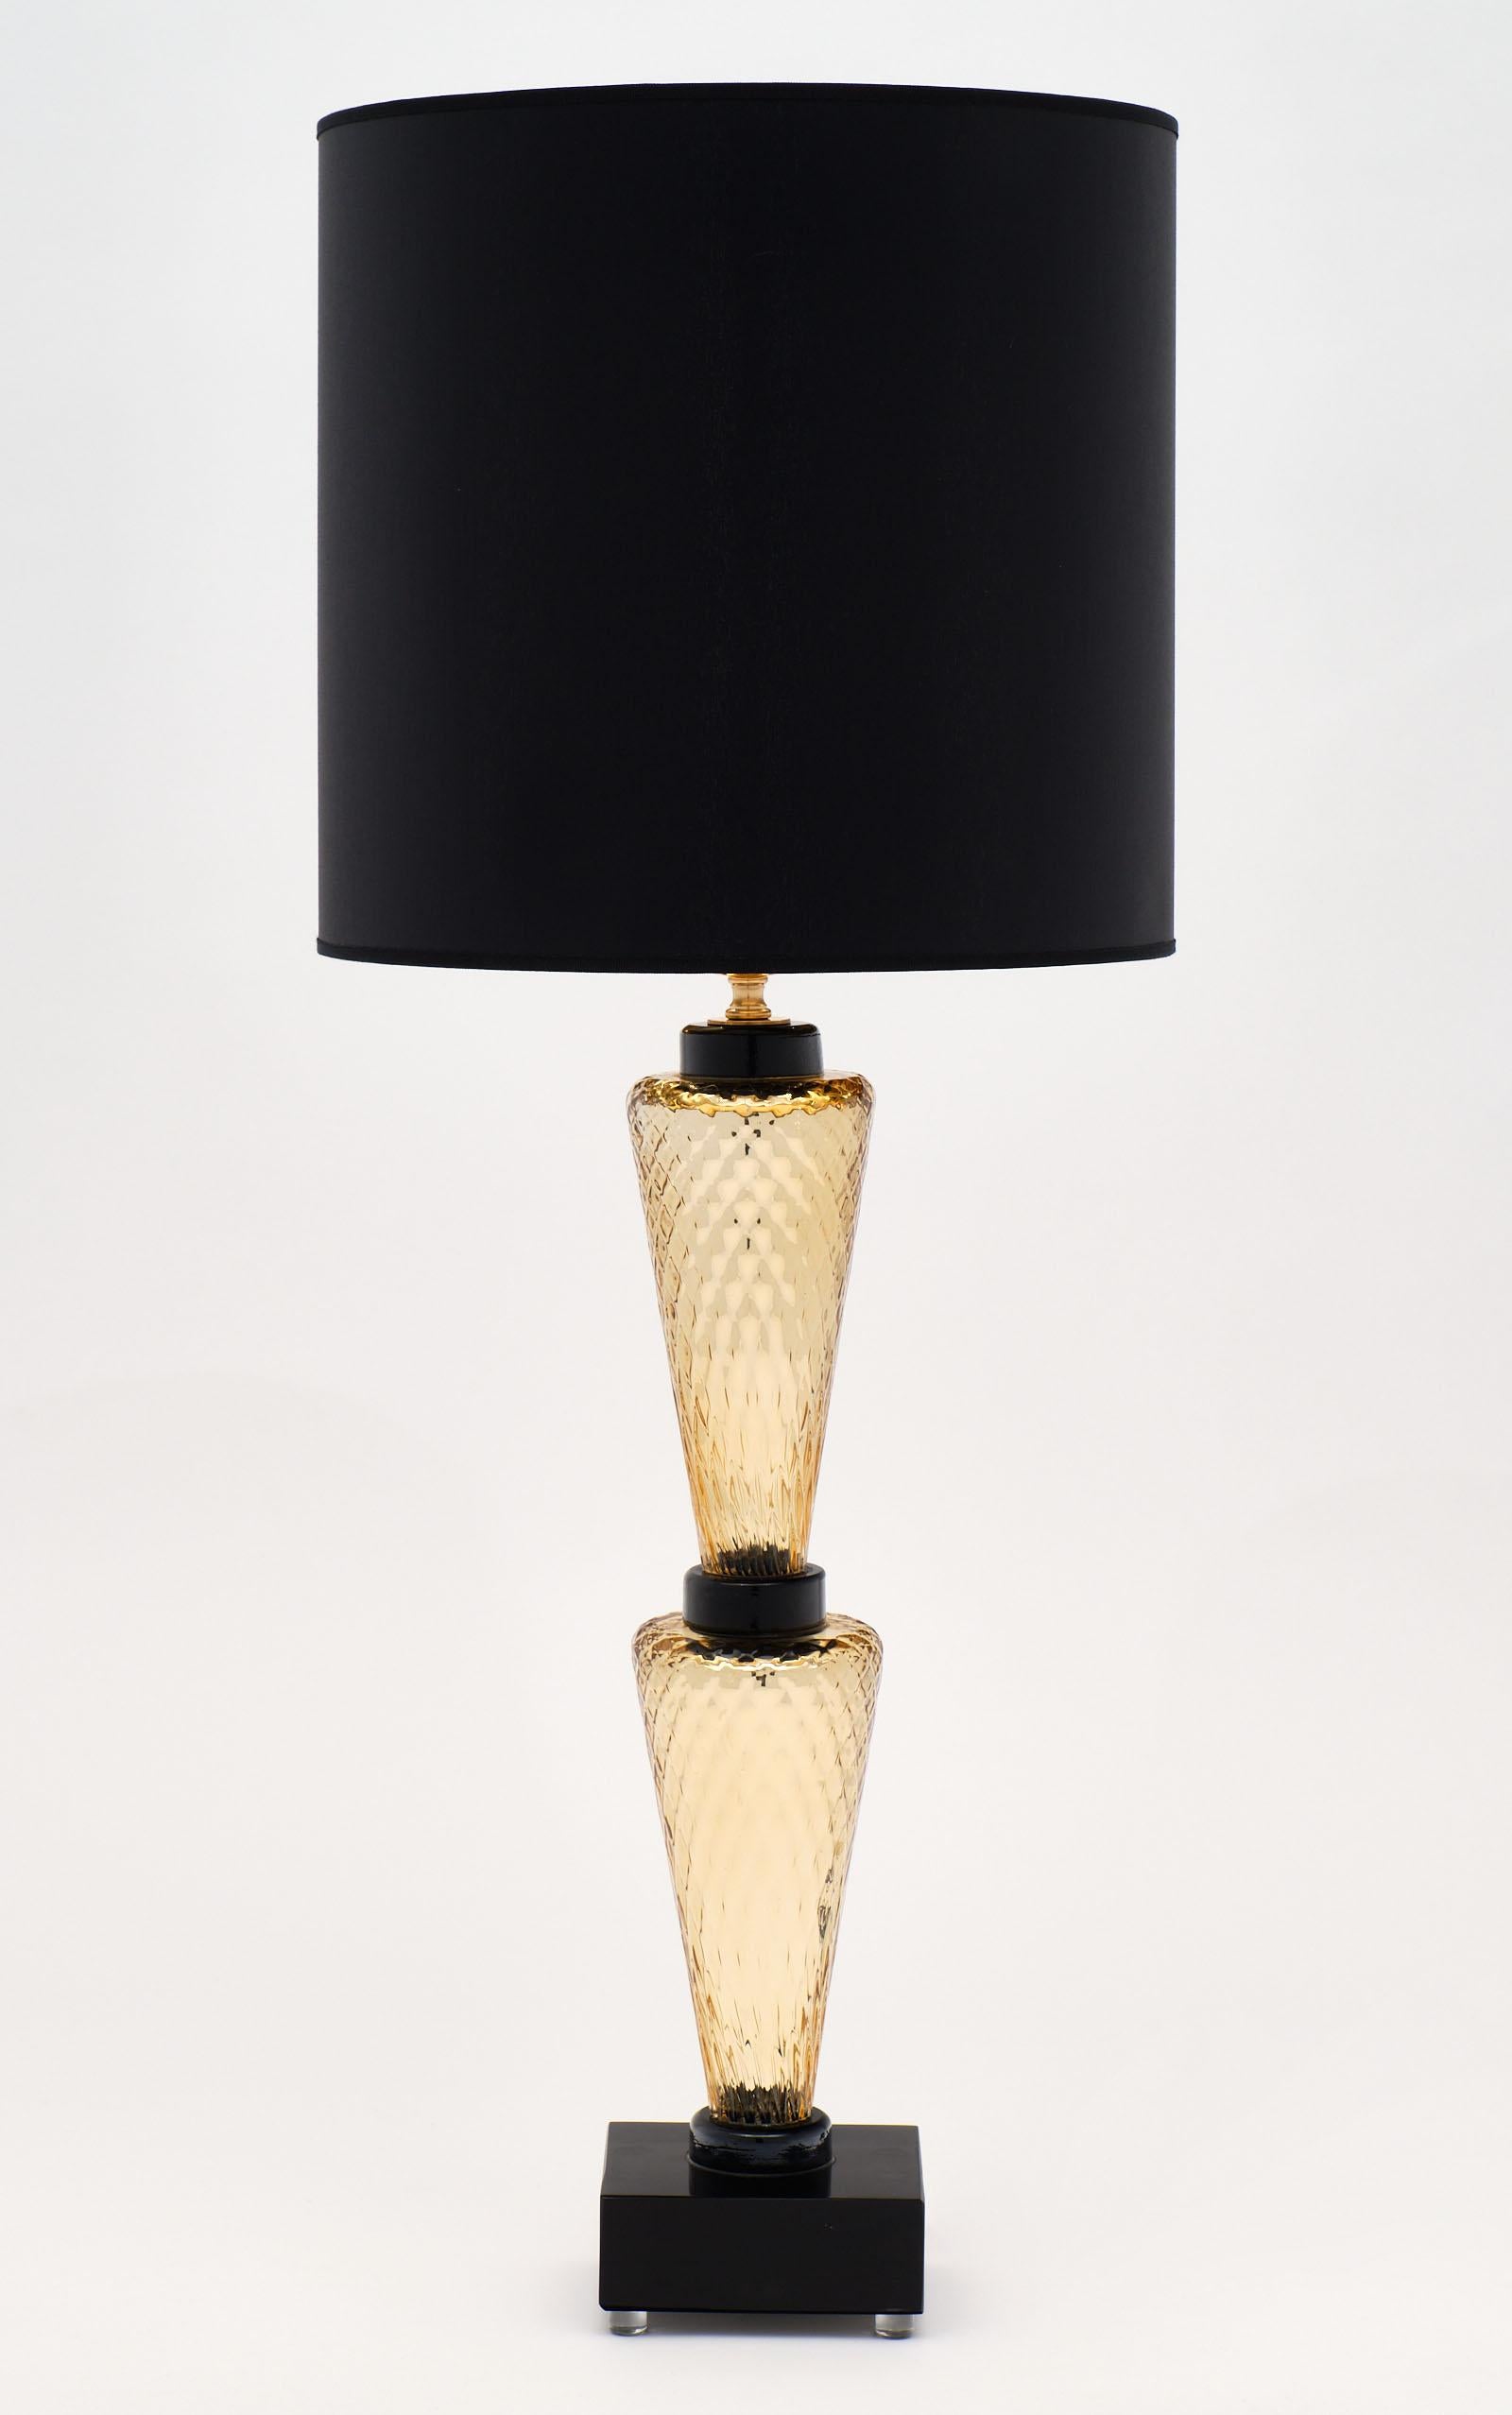 A remarkable pair of Murano glass gold and black “specchiato” lamps with a beautiful texture. We loved the very Classic and dynamic look of the hand blown glass components. The pair is signed by Alberto Dona; and the height of the glass alone is